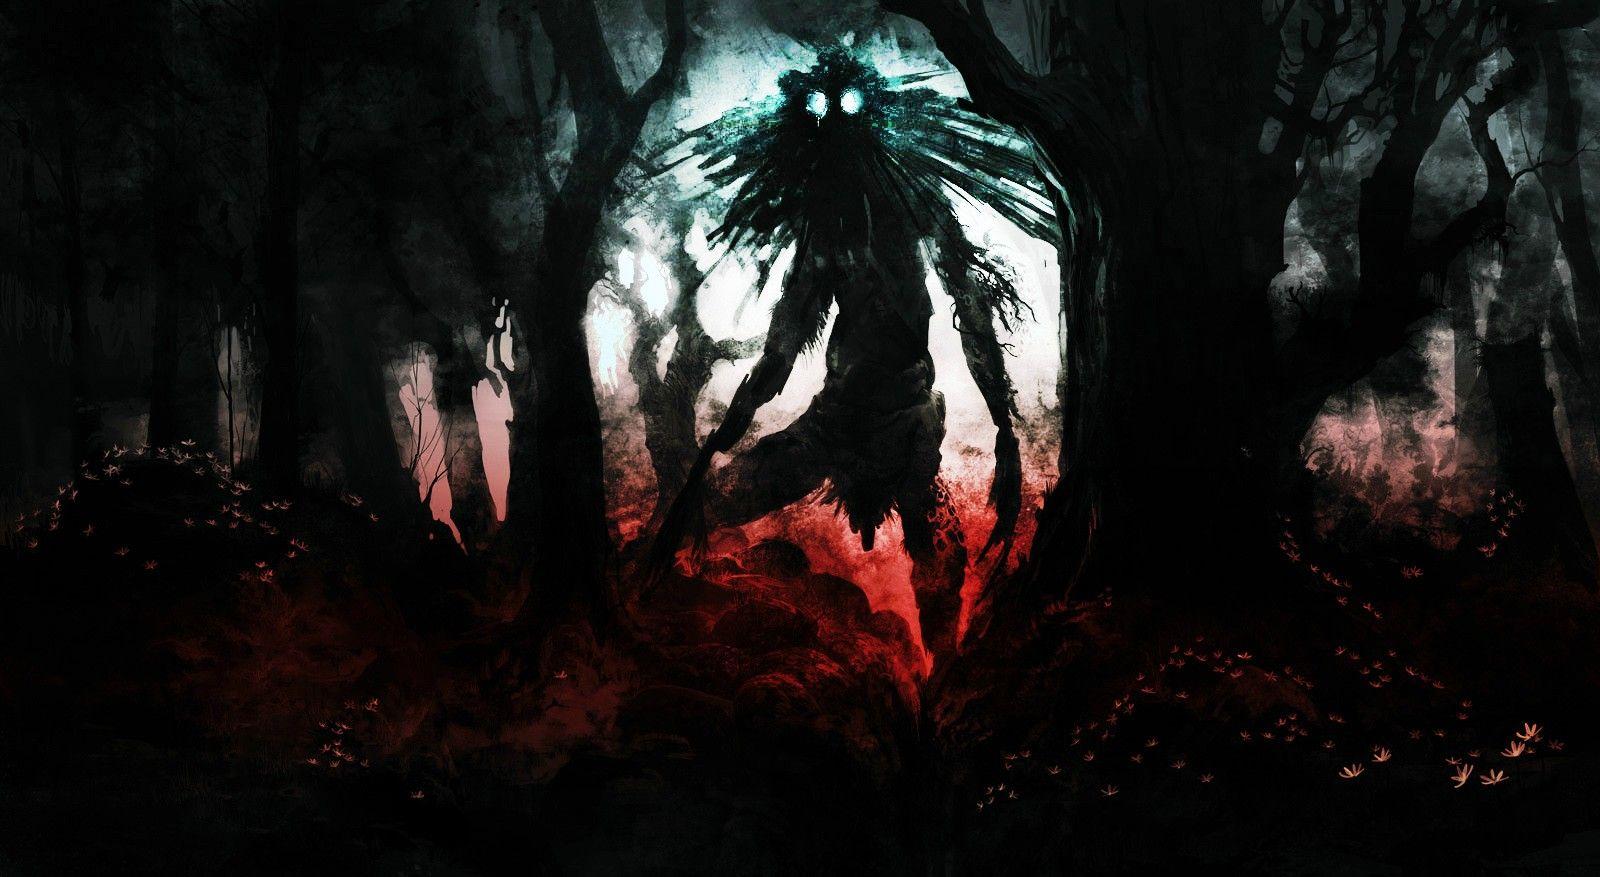 Image detail for -Scary Monster Dark Black Shadow Creepy